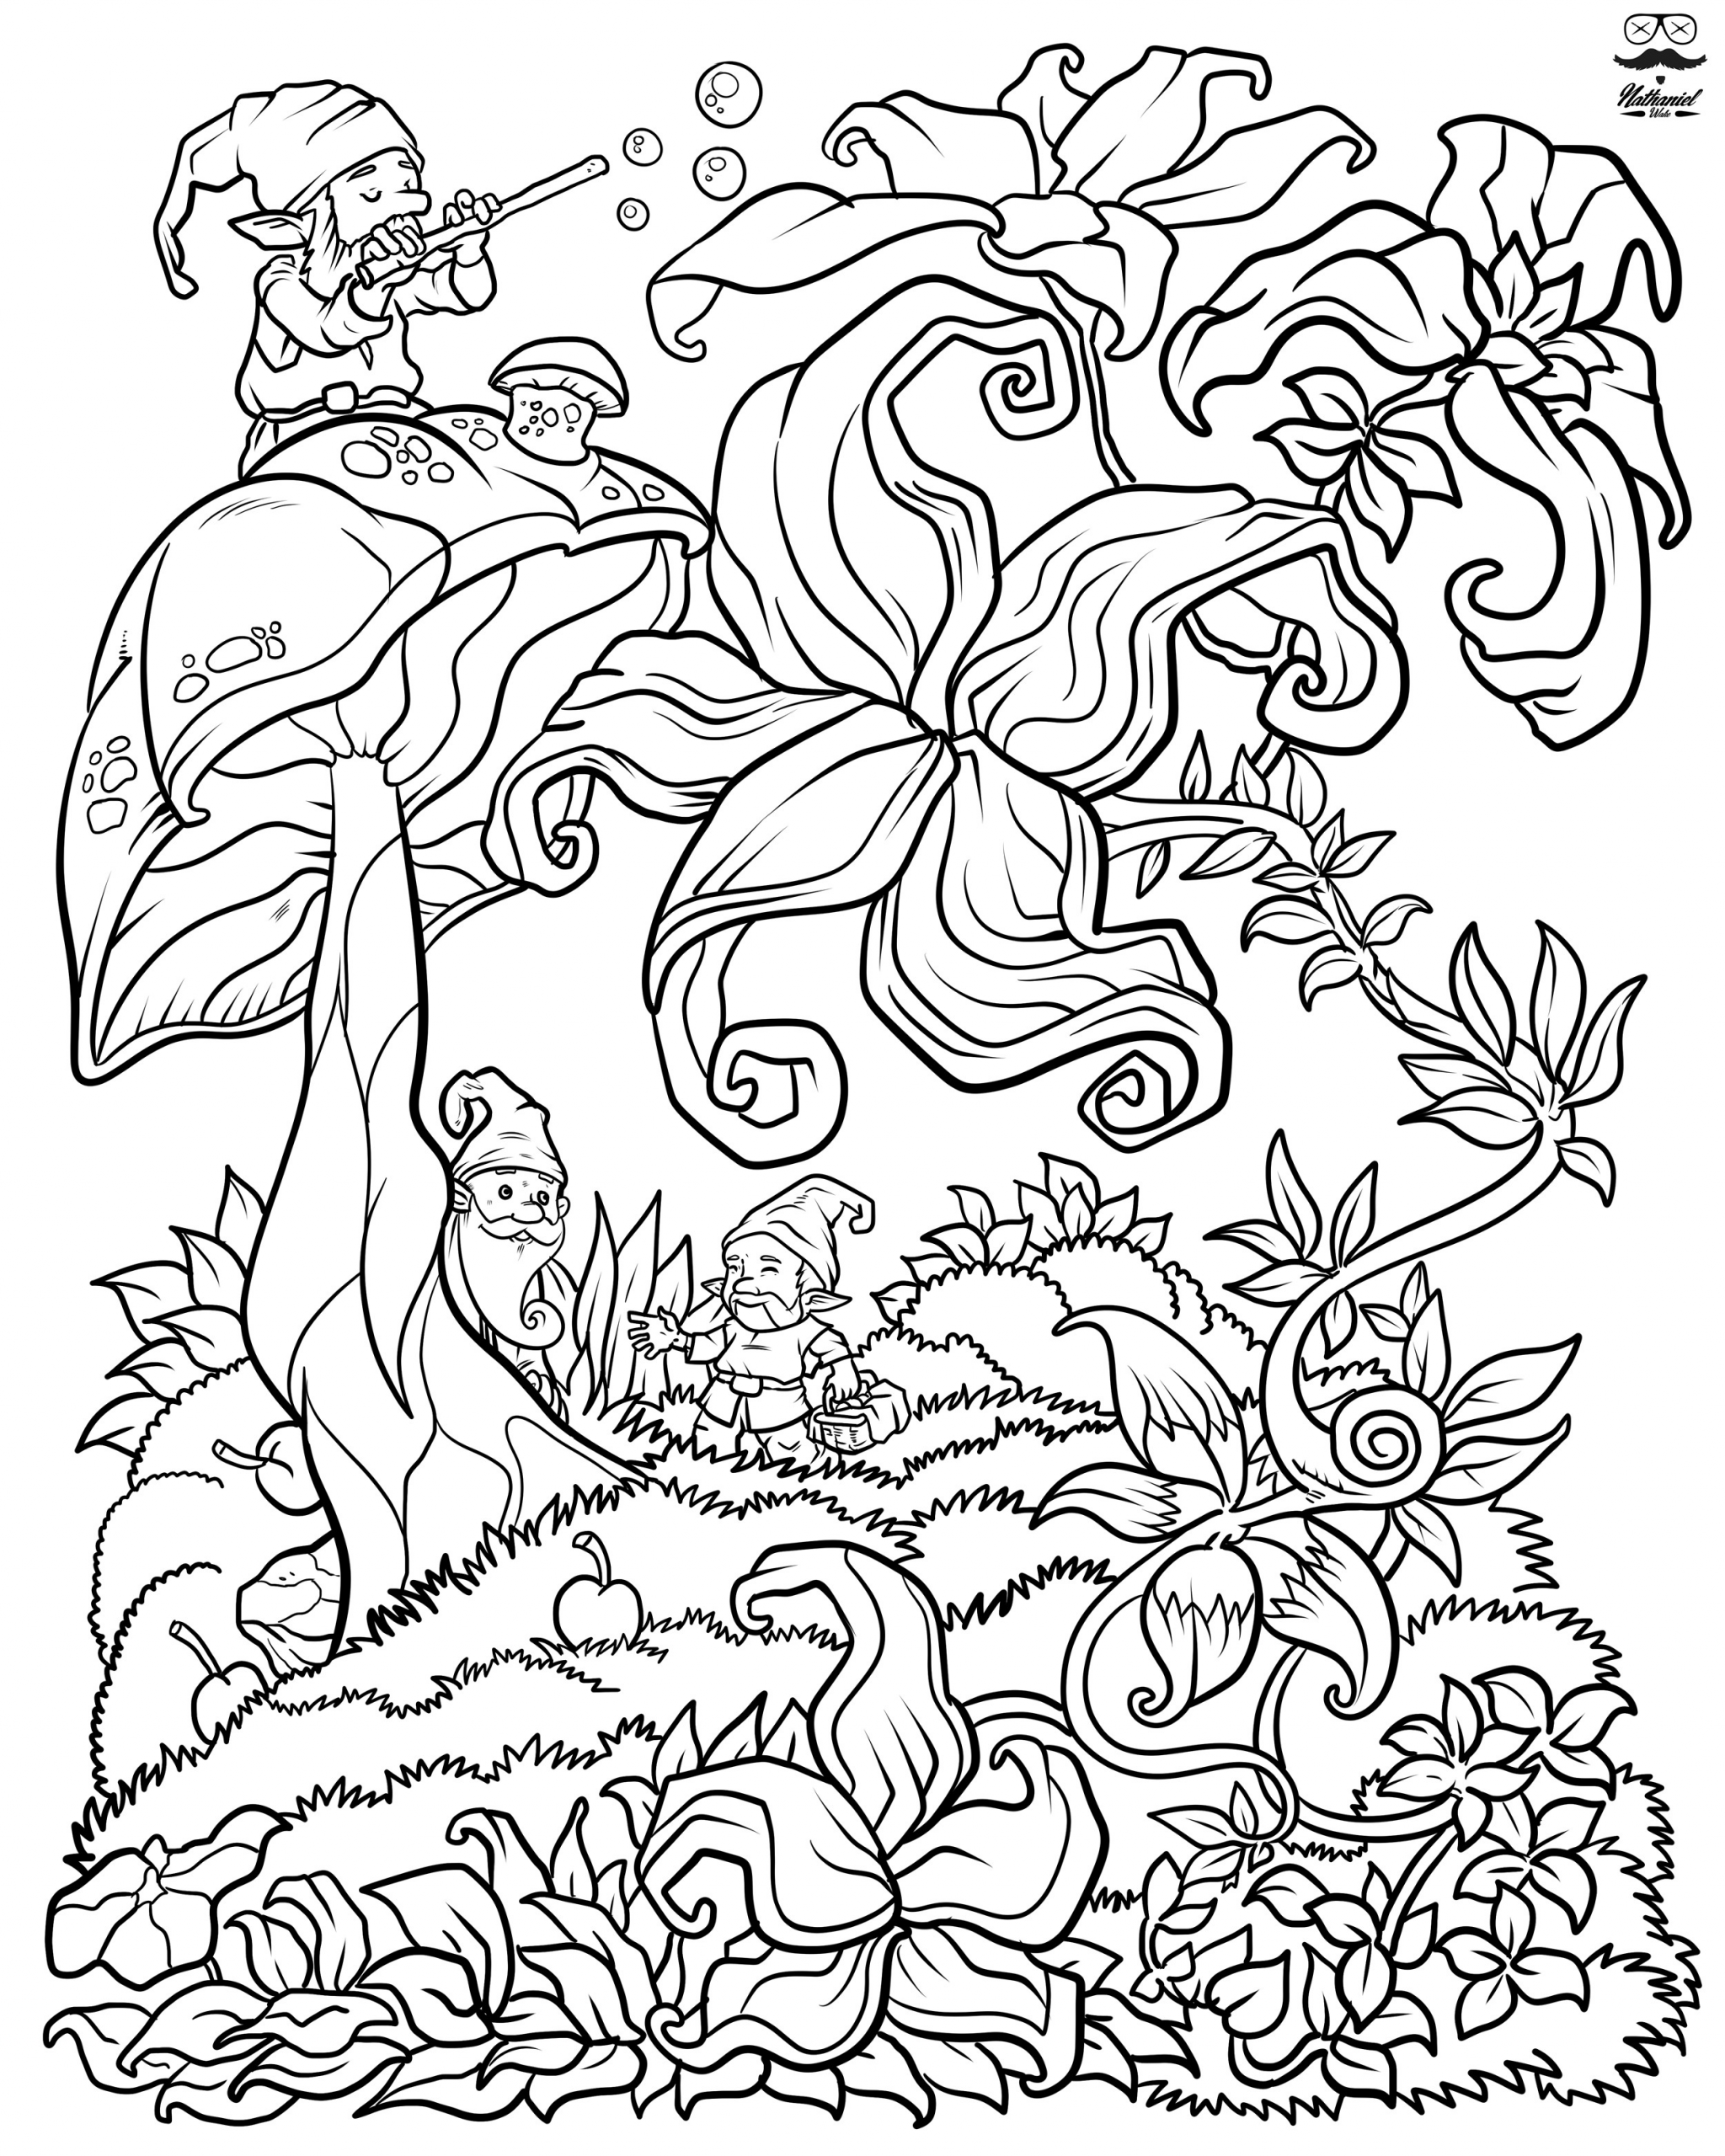 Coloring Books For Adults Printable
 Floral Fantasy Digital Version Adult Coloring Book